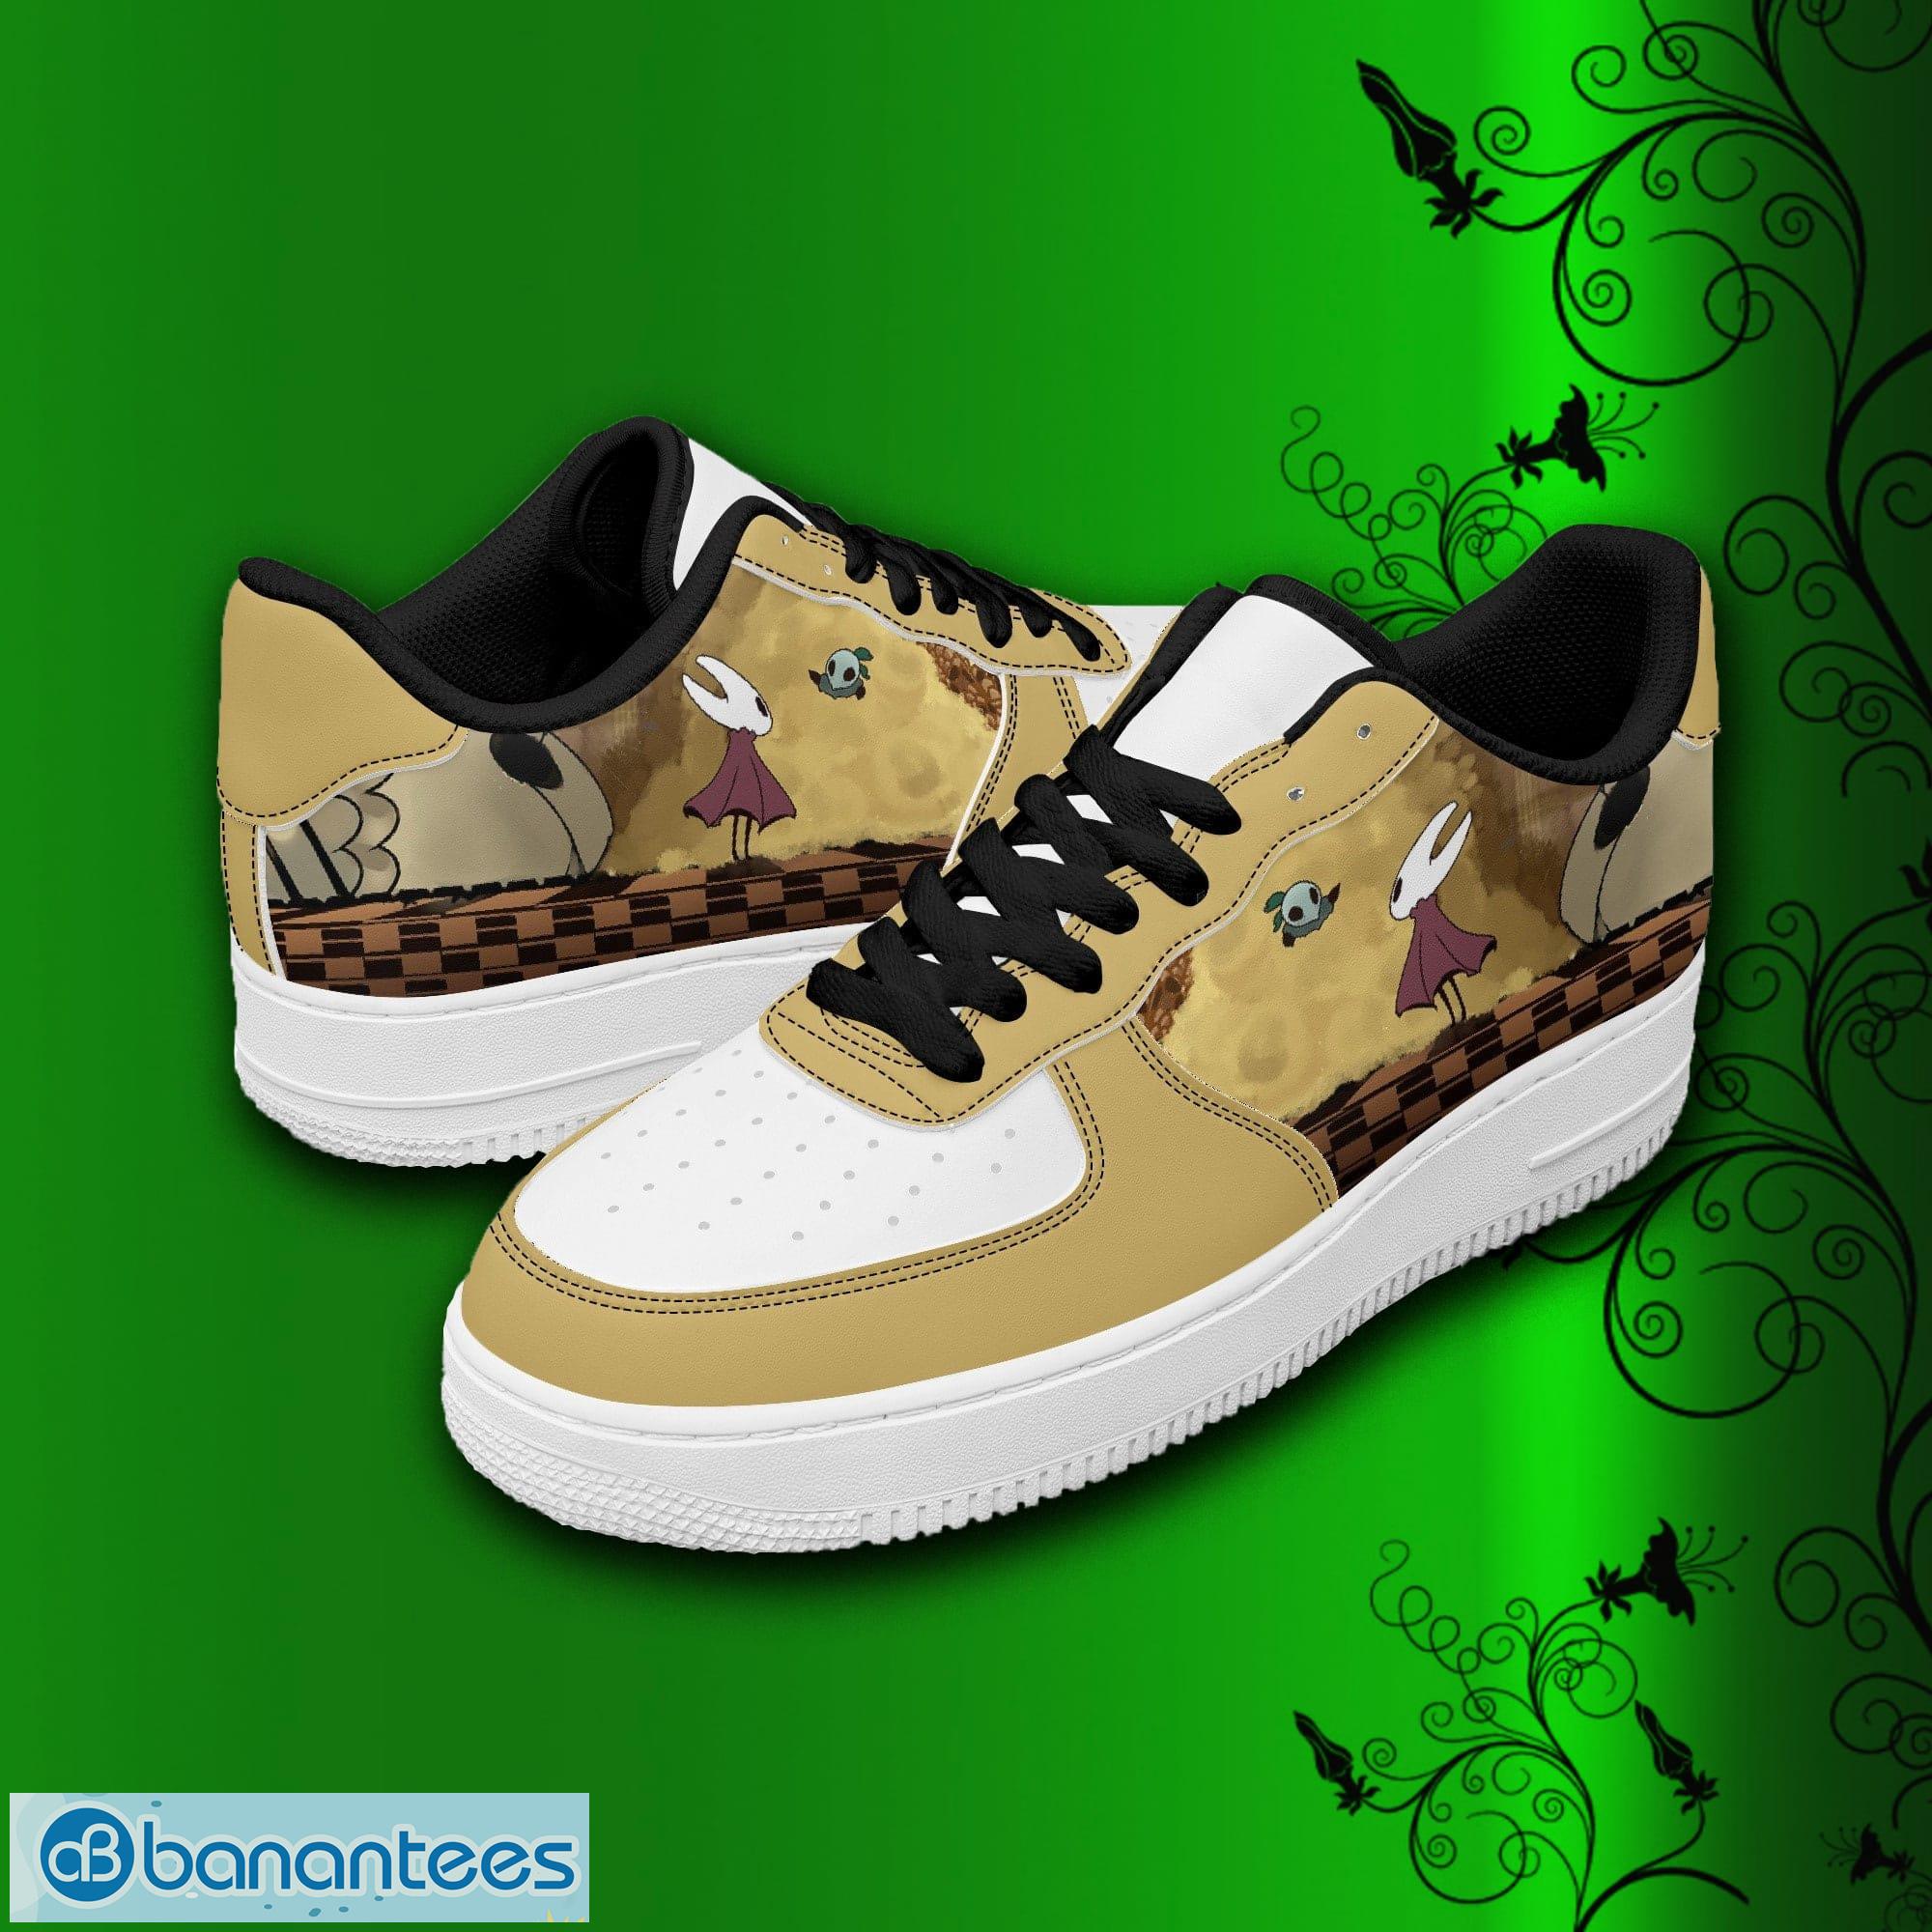 Nike, Shoes, Gucci Air Force Ones For Men Woman Or Kids